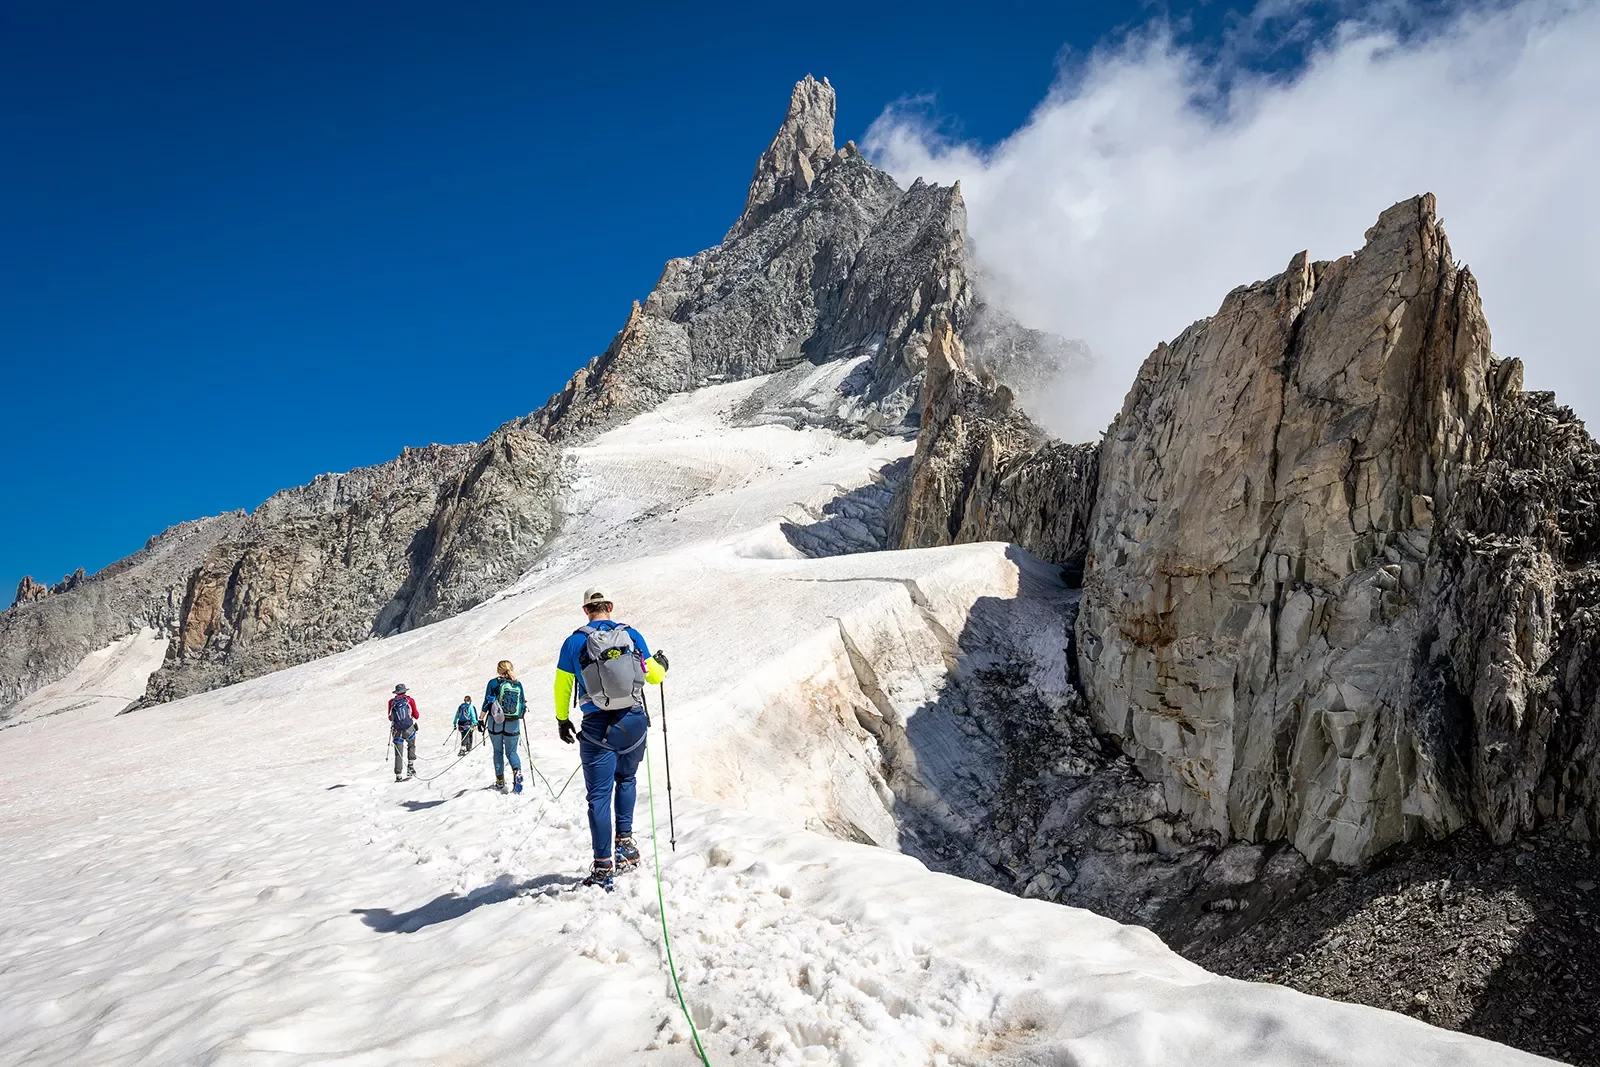 Four guests walking beside snowy cliff, sharp, craggy mountain behind them.